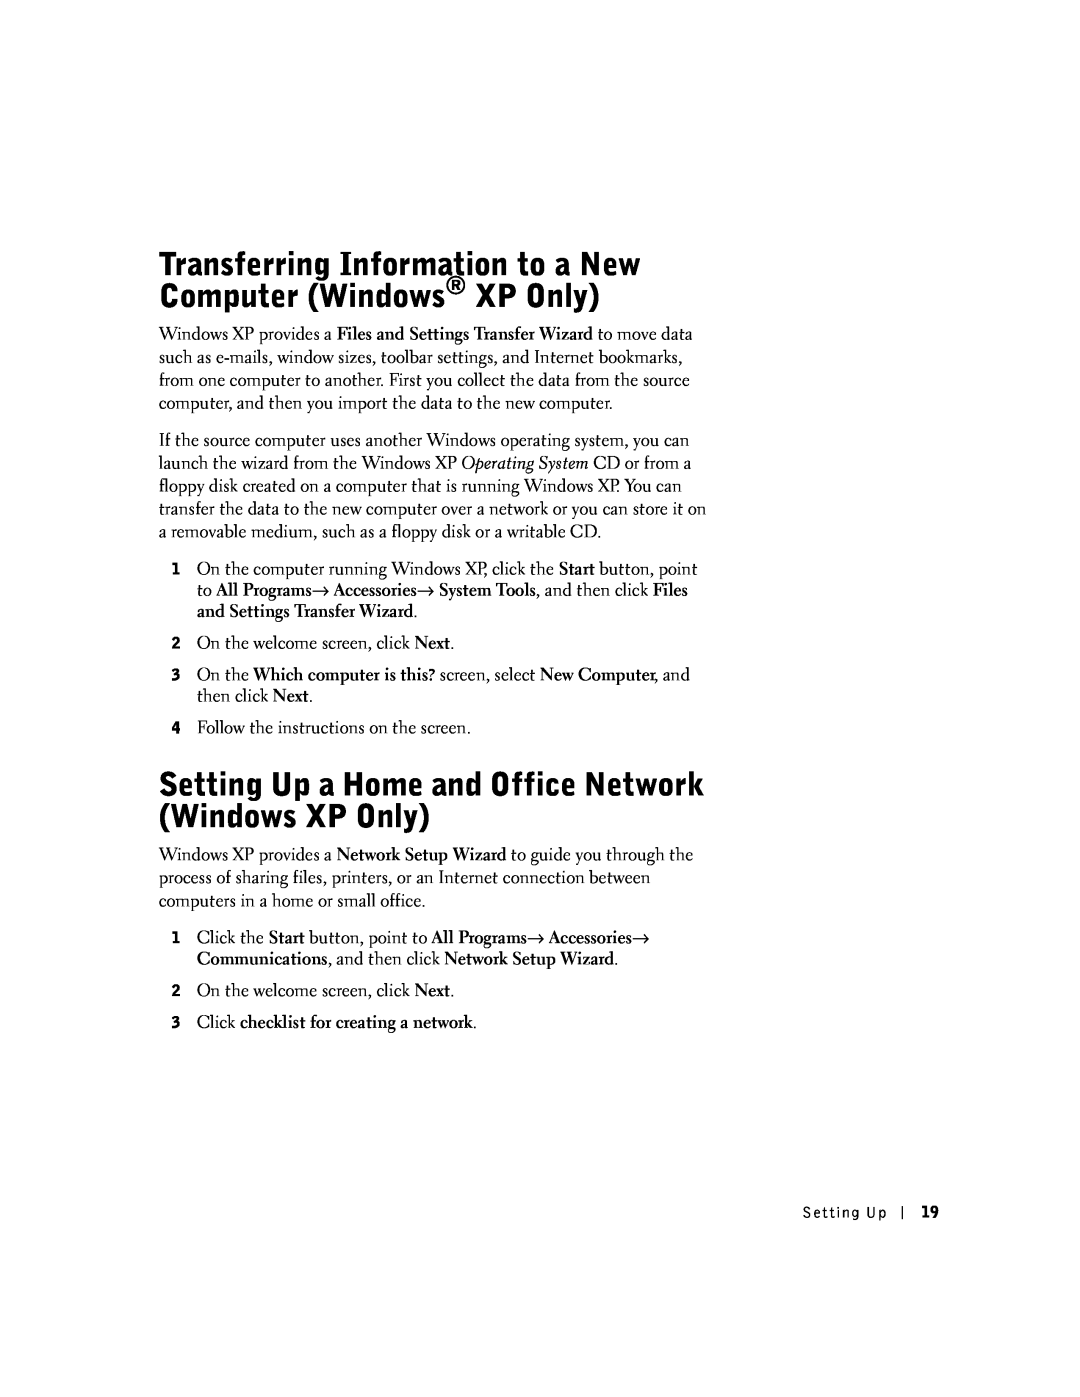 Dell 100N Transferring Information to a New Computer Windows XP Only, Setting Up a Home and Office Network Windows XP Only 